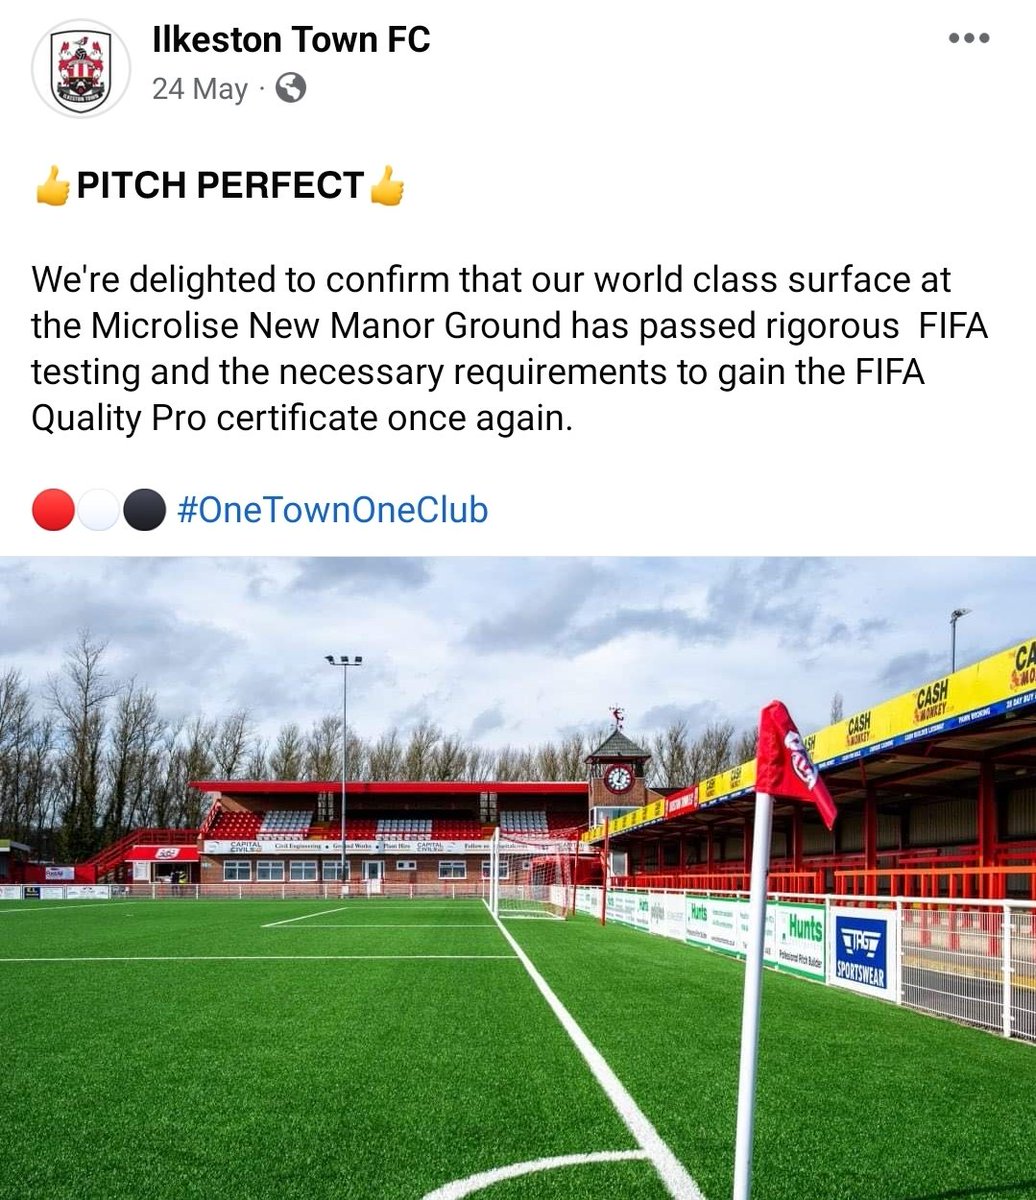 @salbre81 Actually Ilkeston have a better pitch than most NL teams 😆